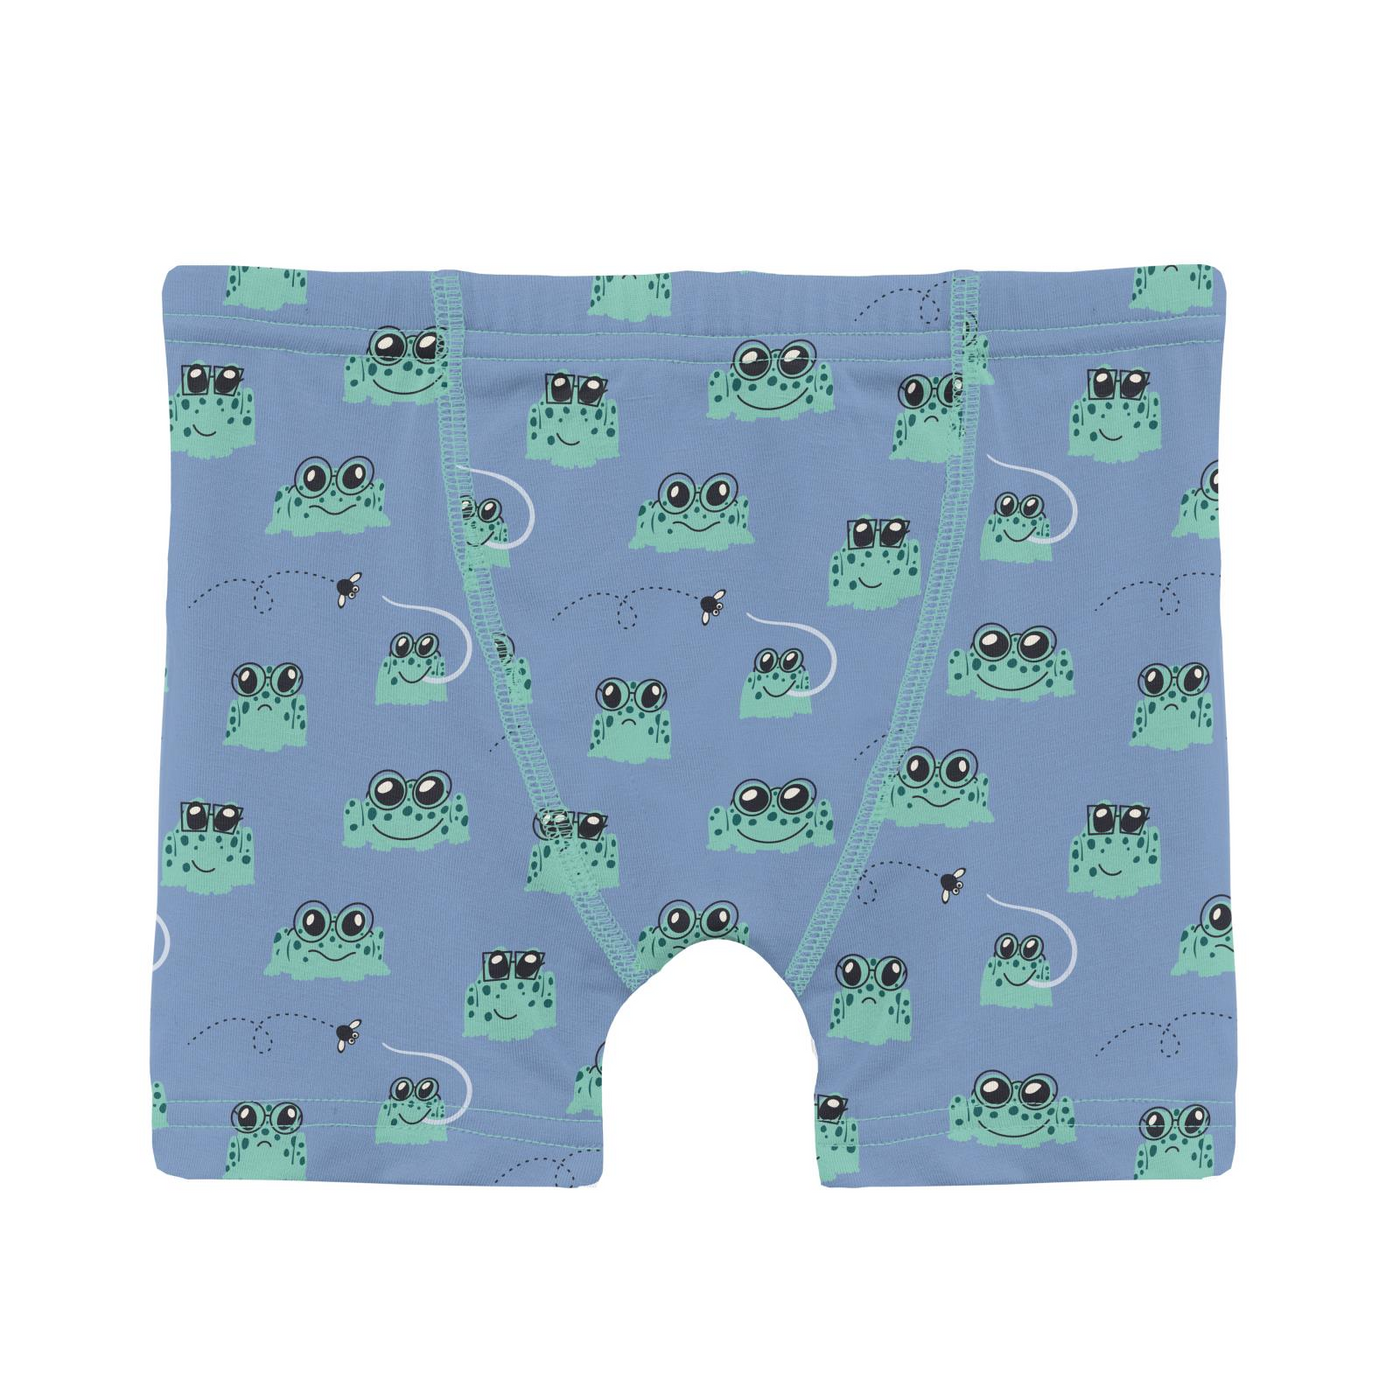 Kickee Pants Boxer Brief Set of 3: Dew Flying Pigs, Dream Blue & Dream Blue Bespeckled Frogs  (Ships 5/15-6/15)